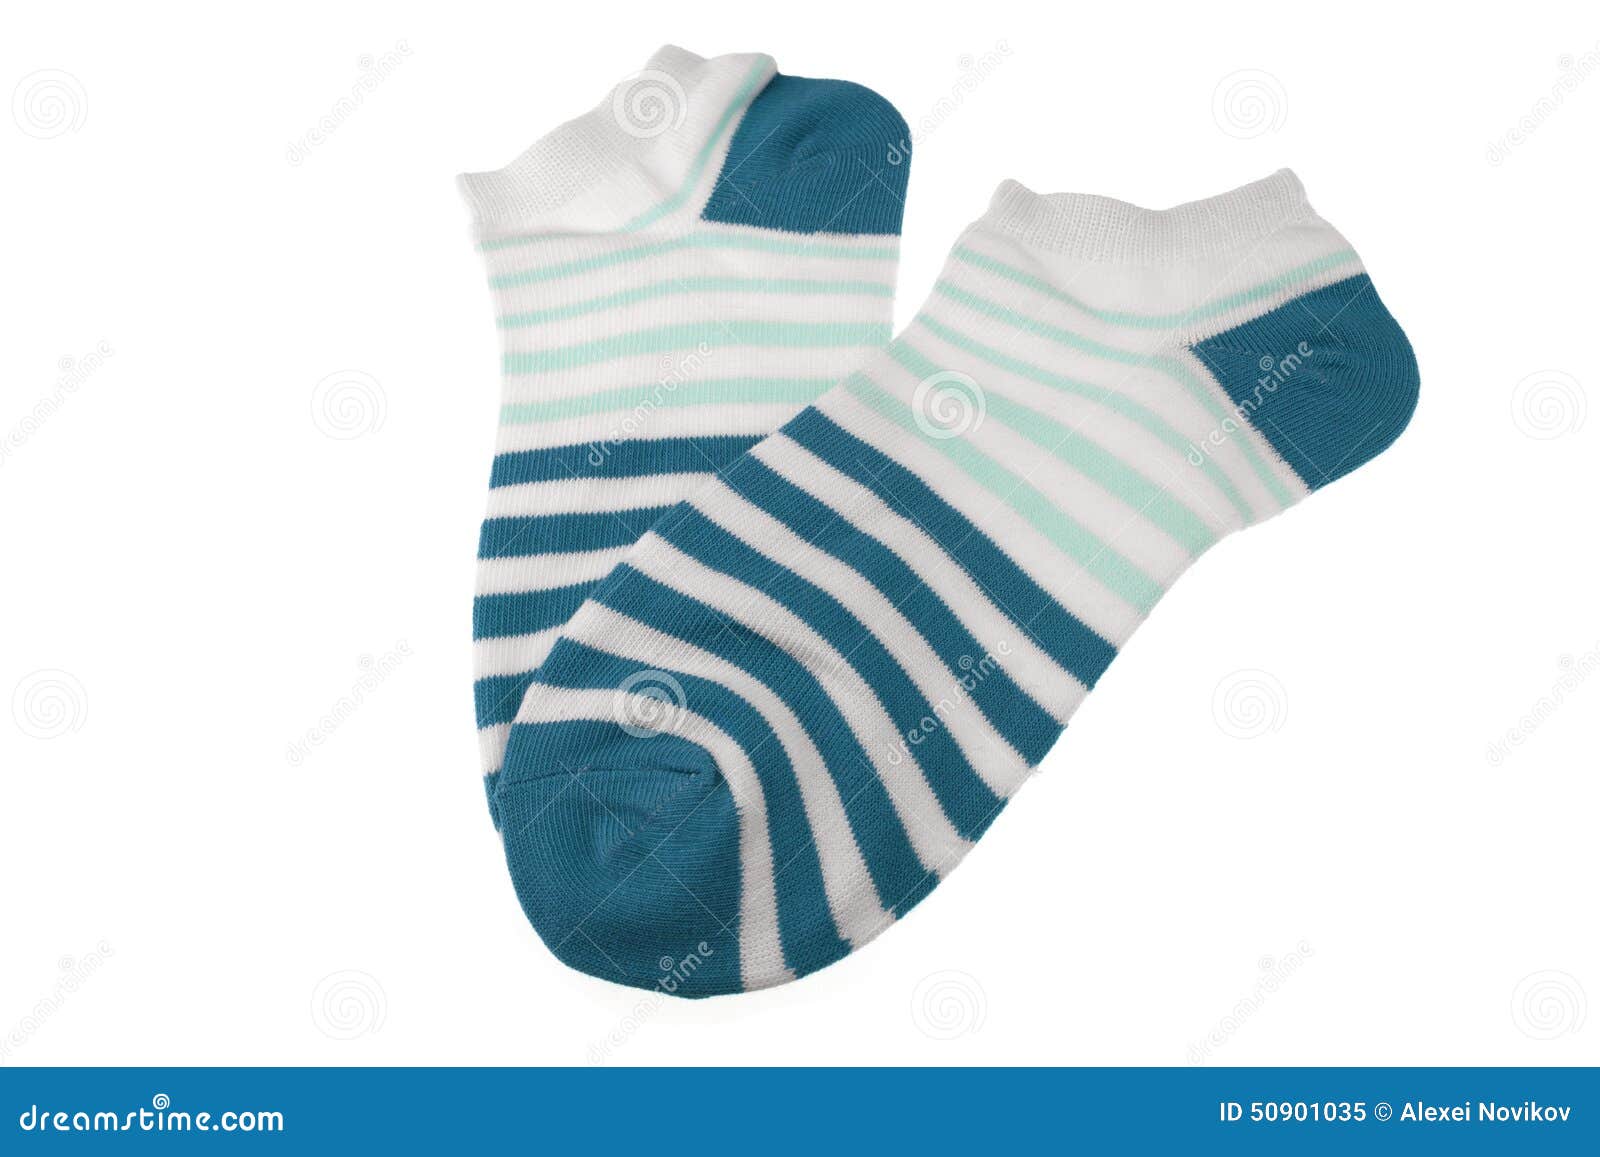 Pair Blue and White Striped Ladies Socks Stock Image - Image of female ...